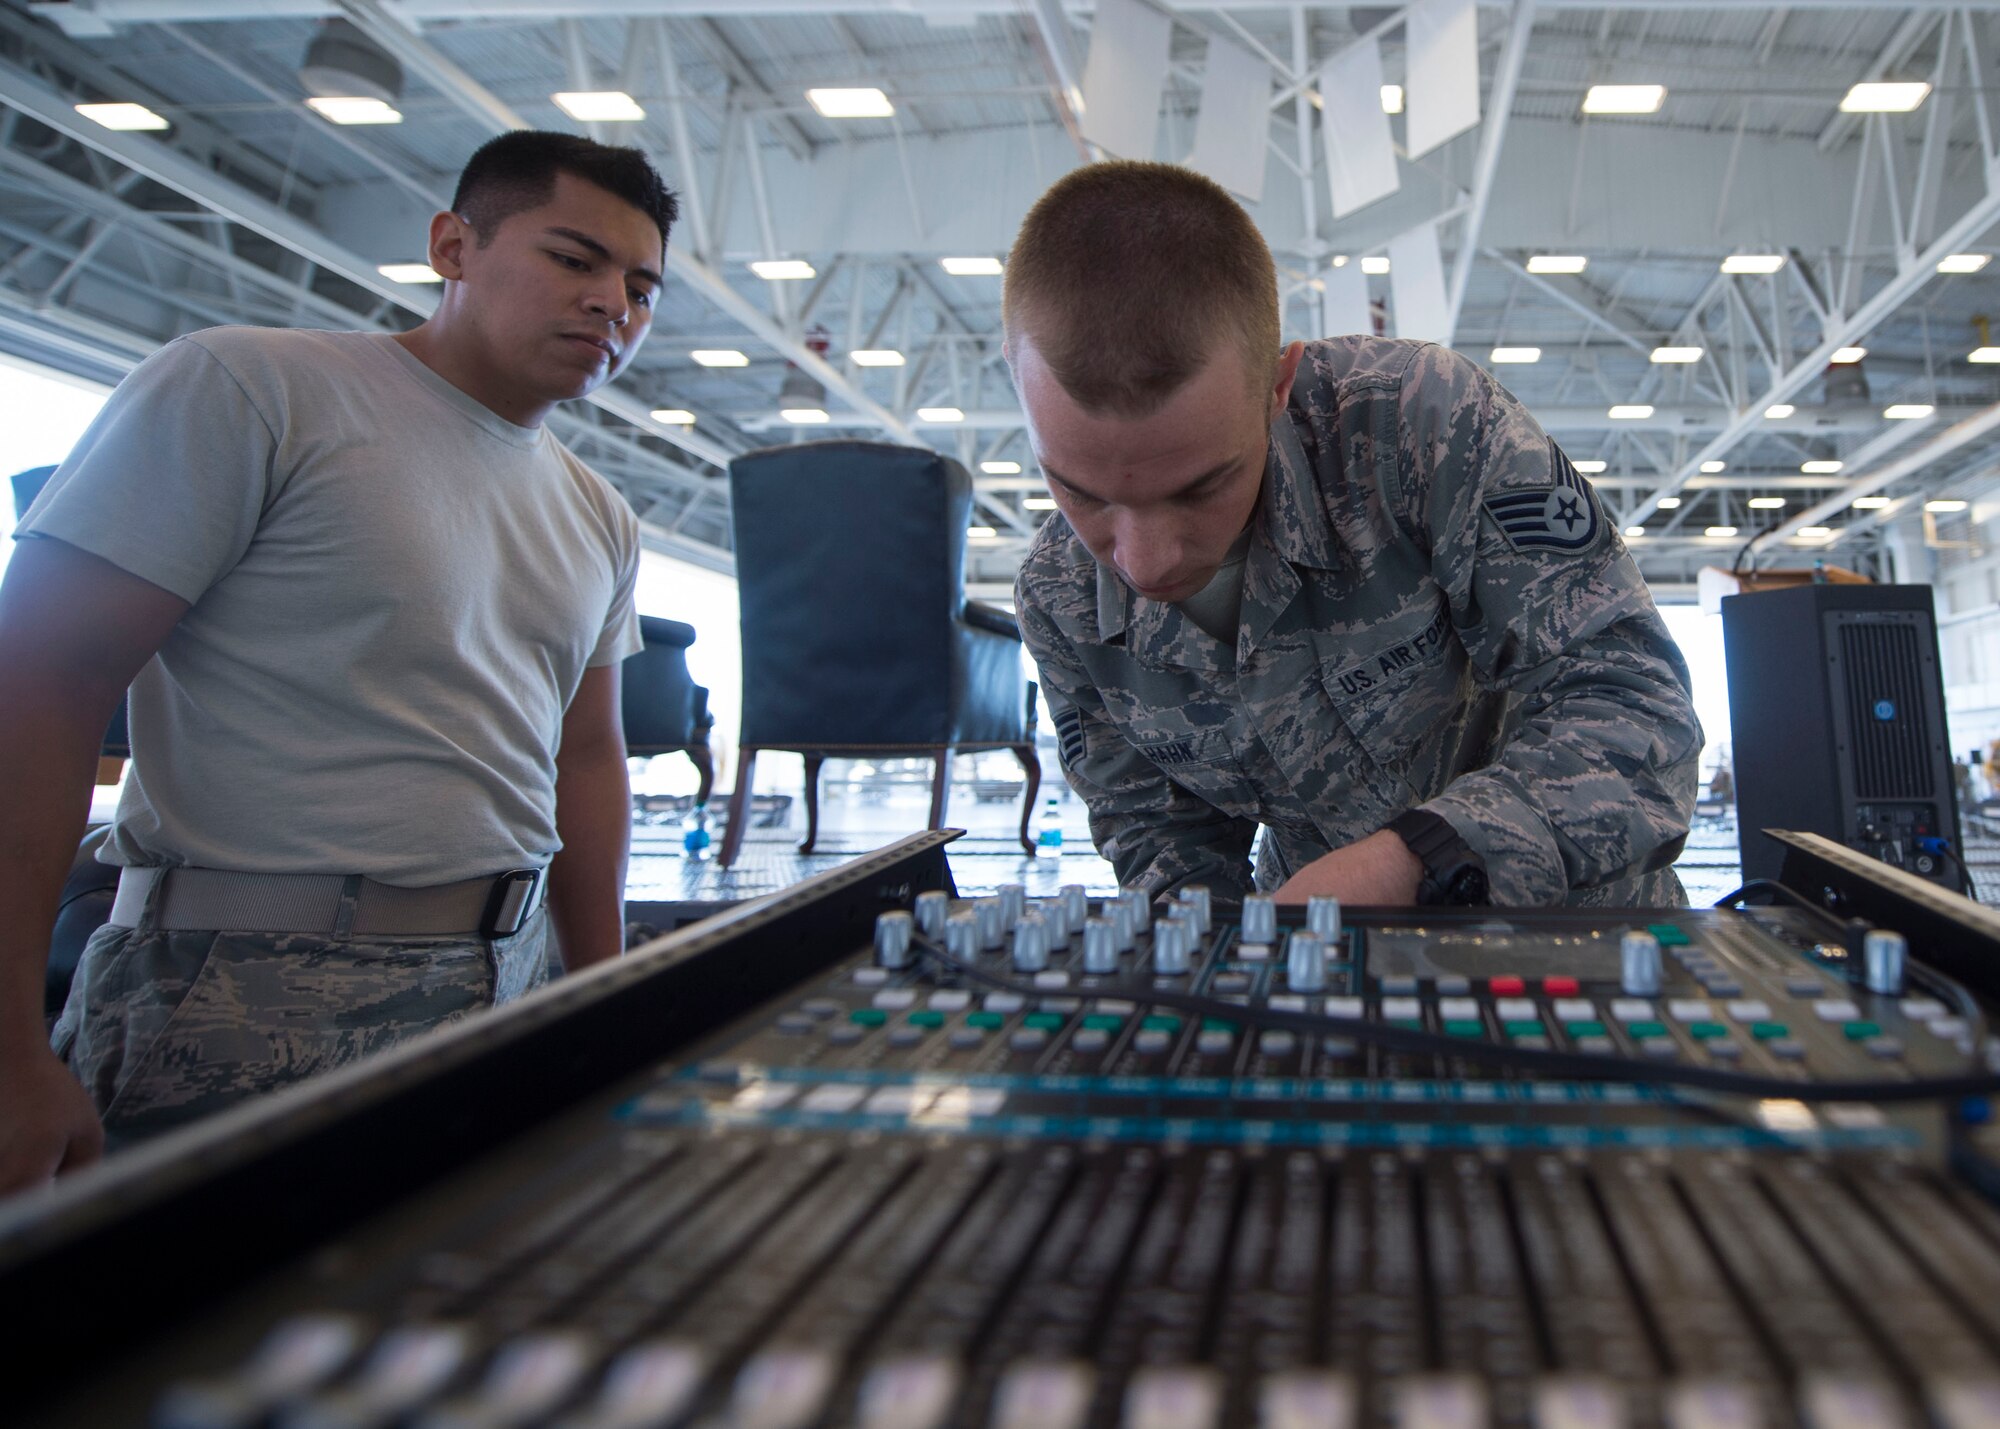 Senior Airman Roy Lizardo, left, and Staff Sgt. Andrew Muhlhahn, radio frequency systems journeymen with the 1st Special Operations Communications Squadron, sets up audio equipment for a change of command ceremony at the Freedom Hangar on Hurlburt Field, Fla., July 15, 2016. 1st SOCS Airmen provide audio support for different ceremonies and events on base. (U.S. Air Force photo by Senior Airman Krystal M. Garrett)